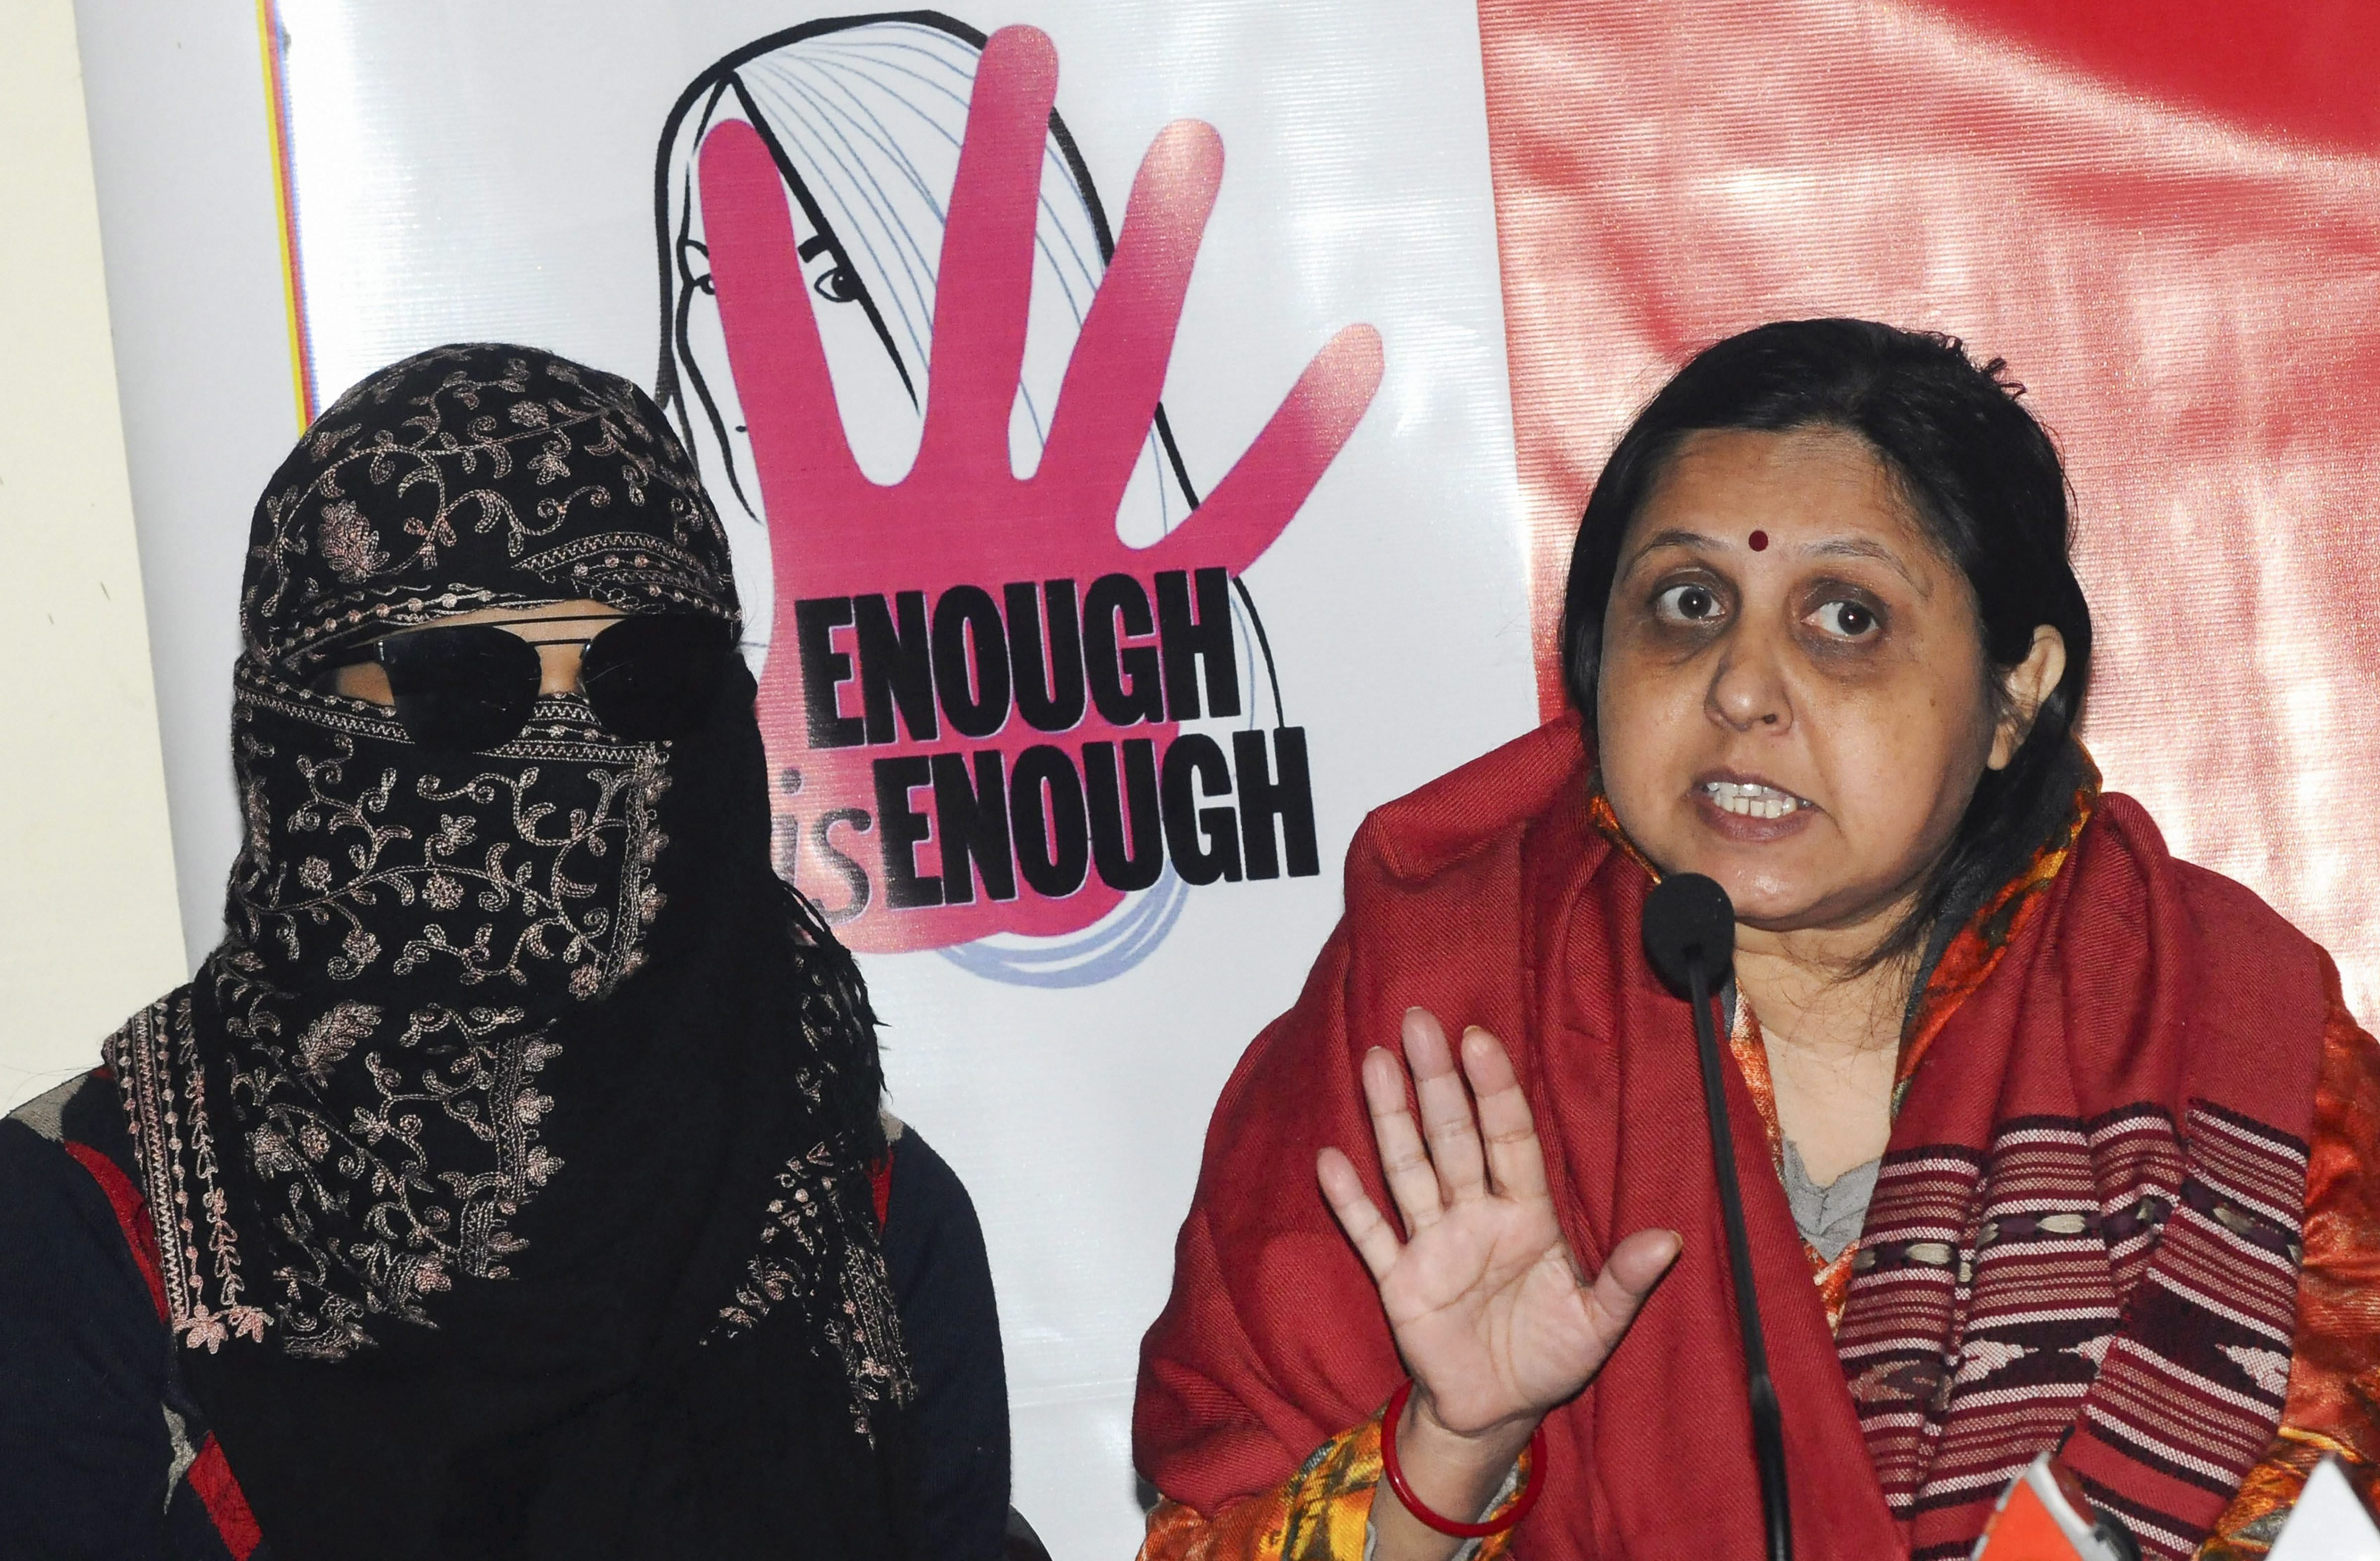 Advocate and mediator Varuna Bhandari, with an employee of Doordarshan Television Network who was allegedly sexually harassed by superiors, addresses a press conference in New Delhi - PTI